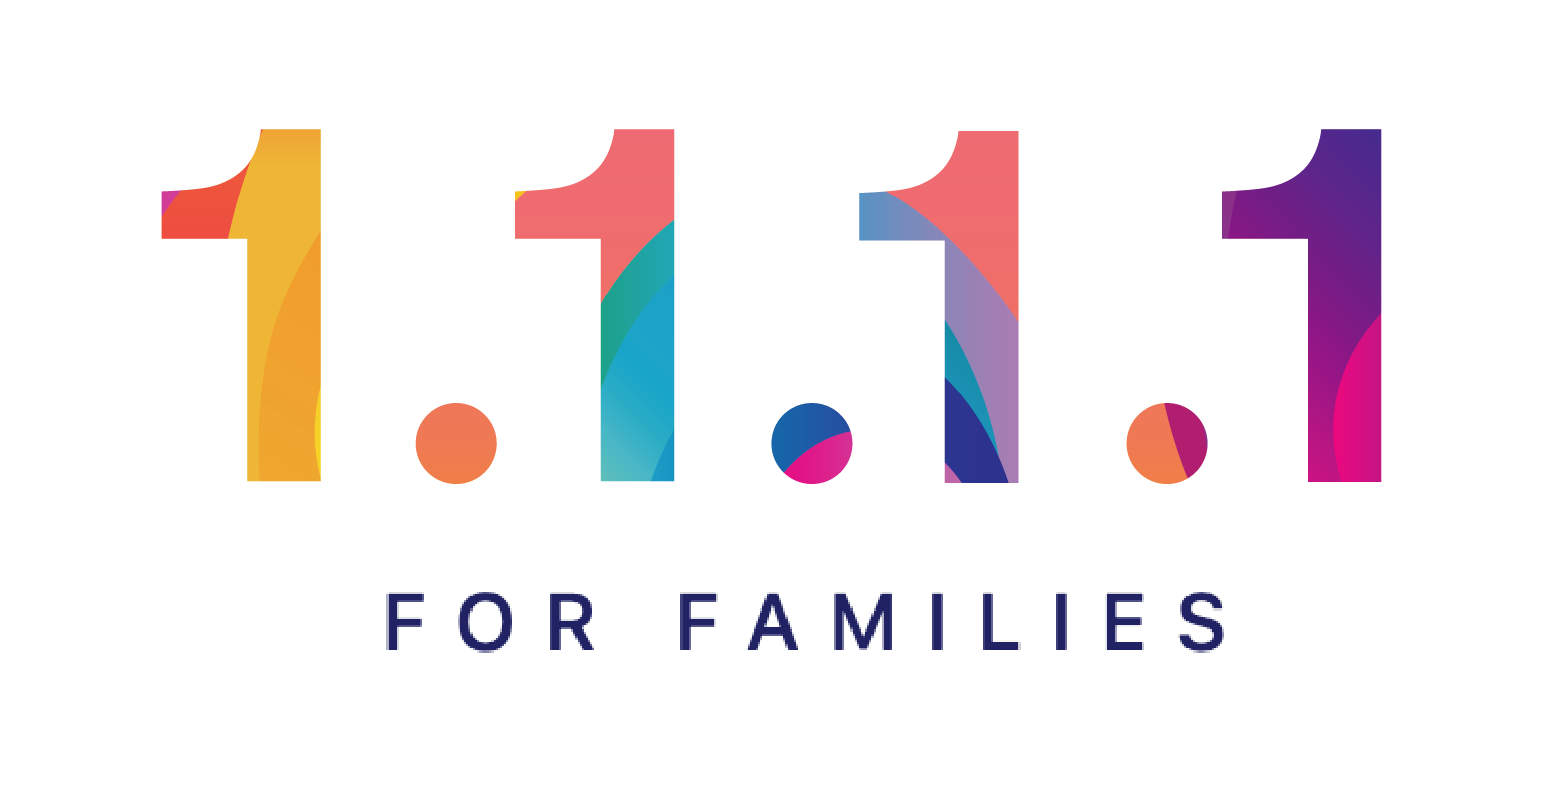 Introducing 1.1.1.1 for Families image3.png